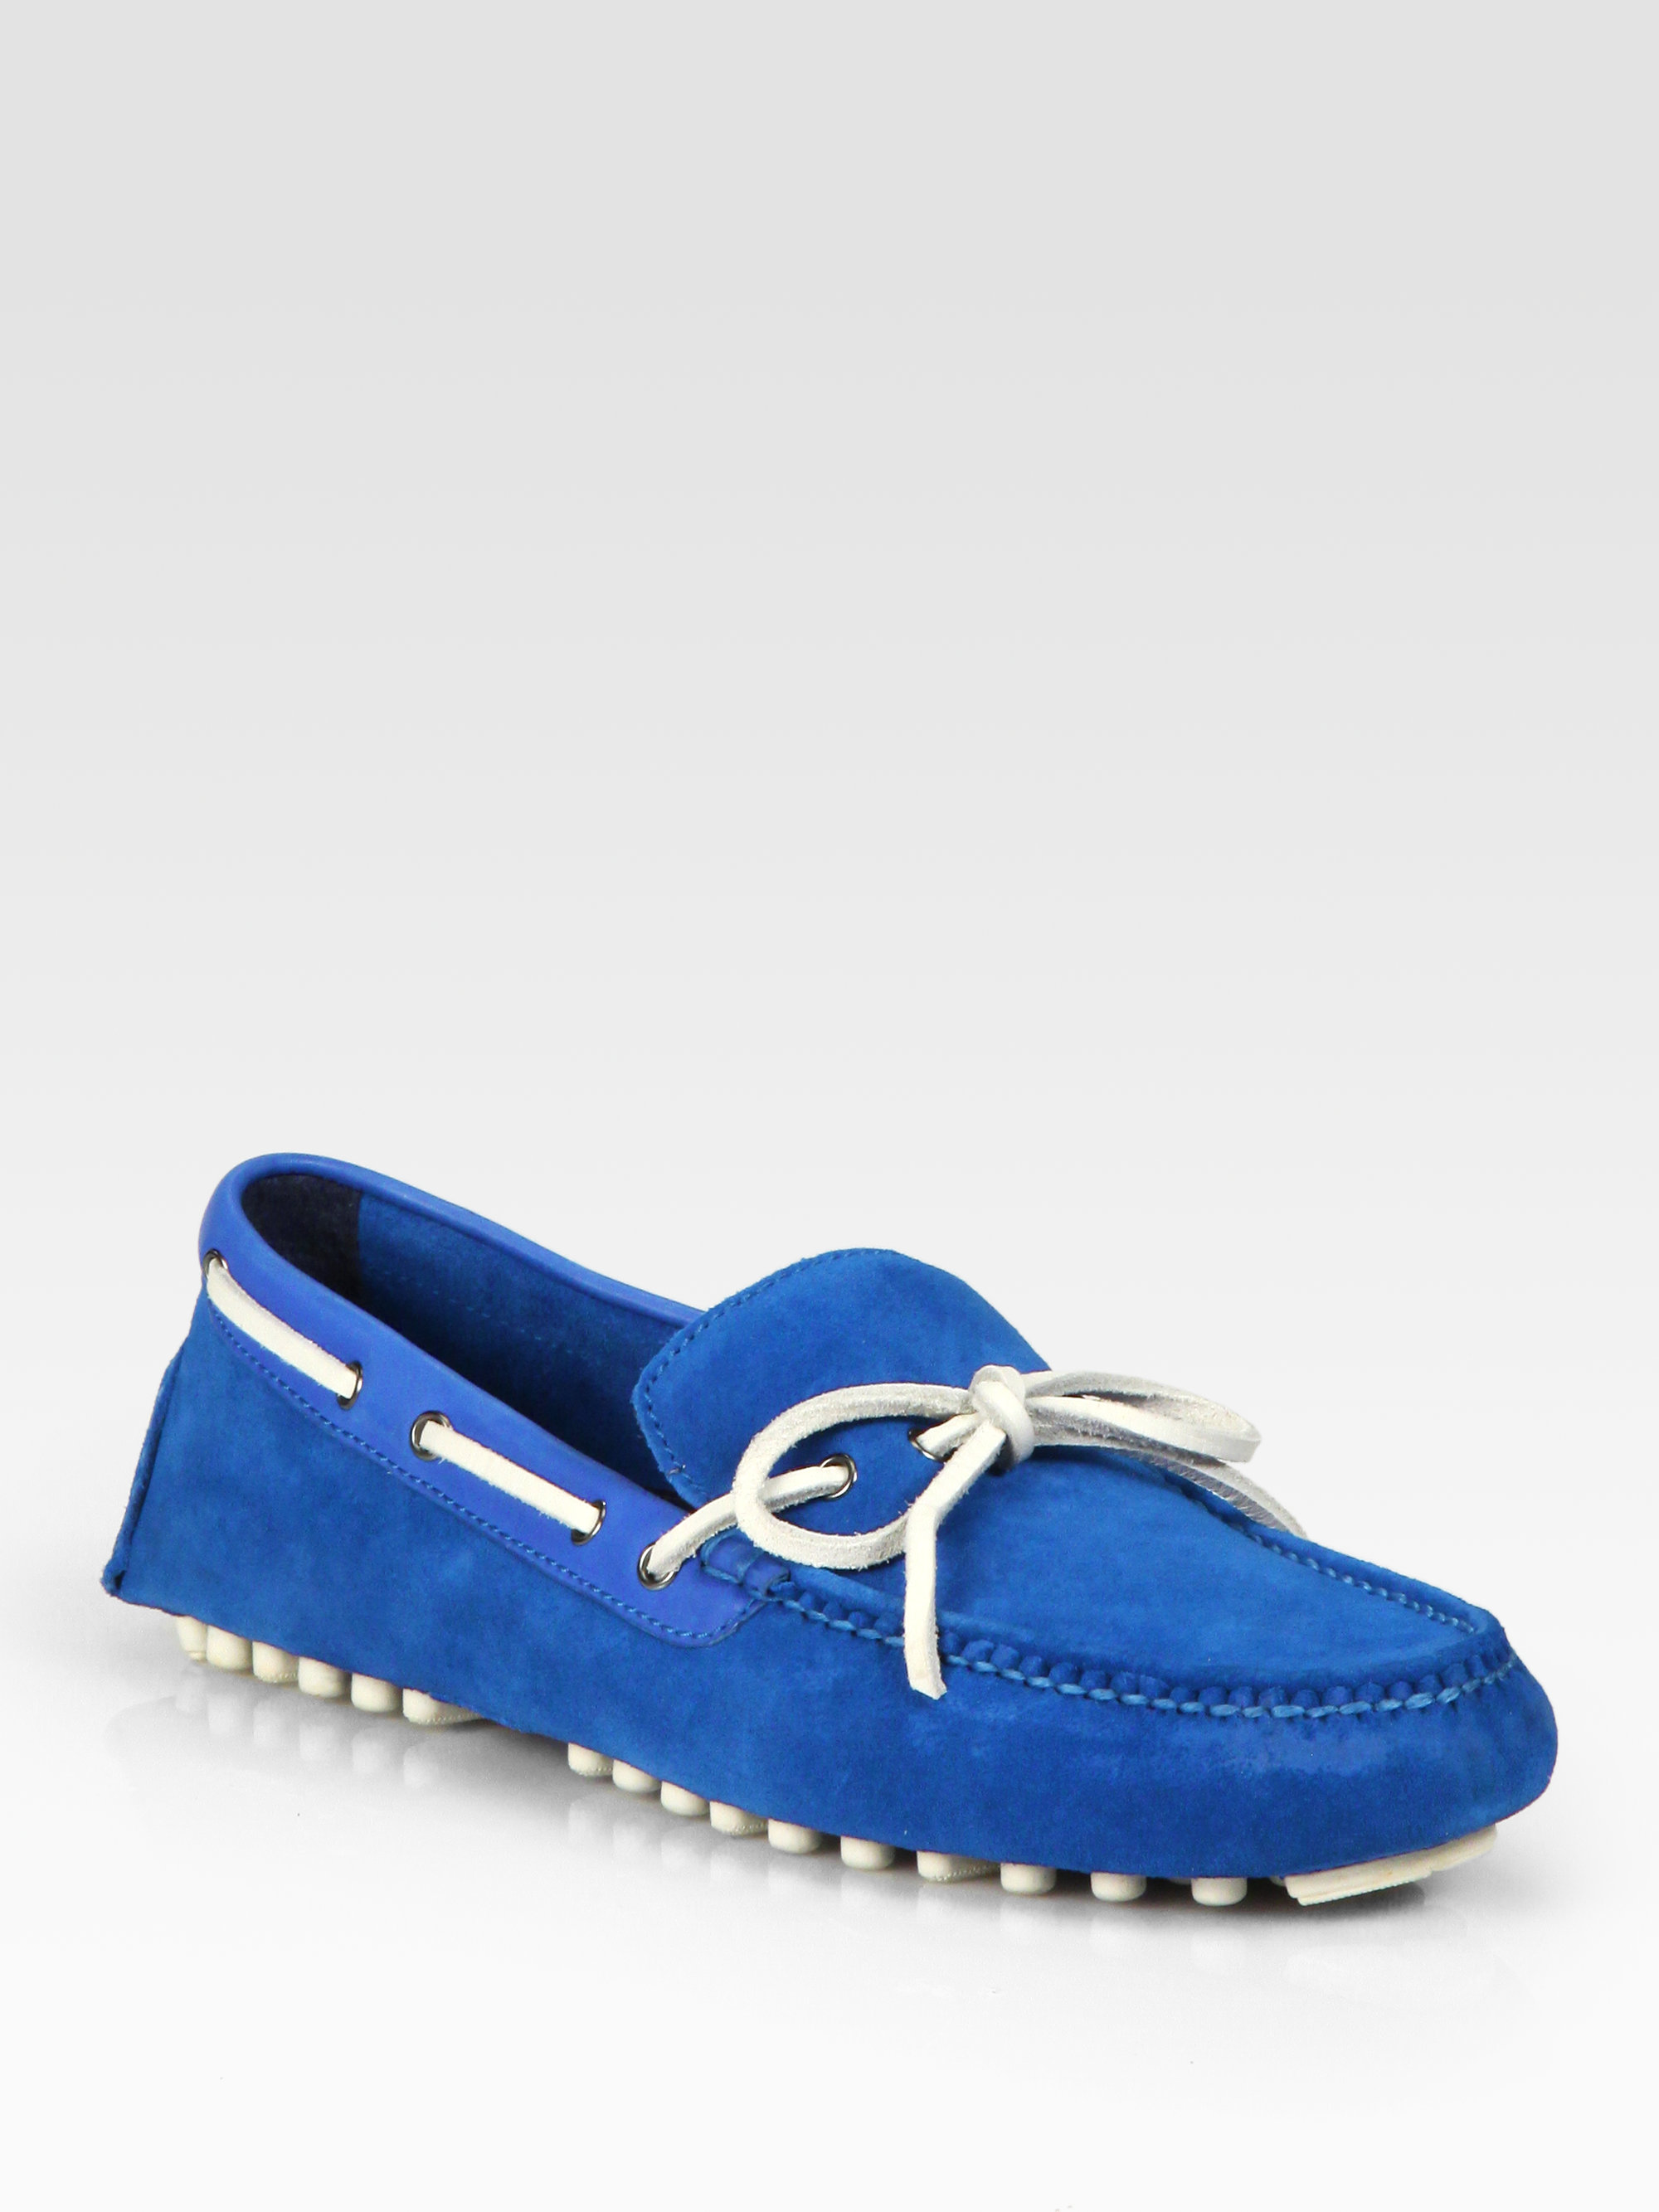 Sale > cole haan driving moccasins > in stock